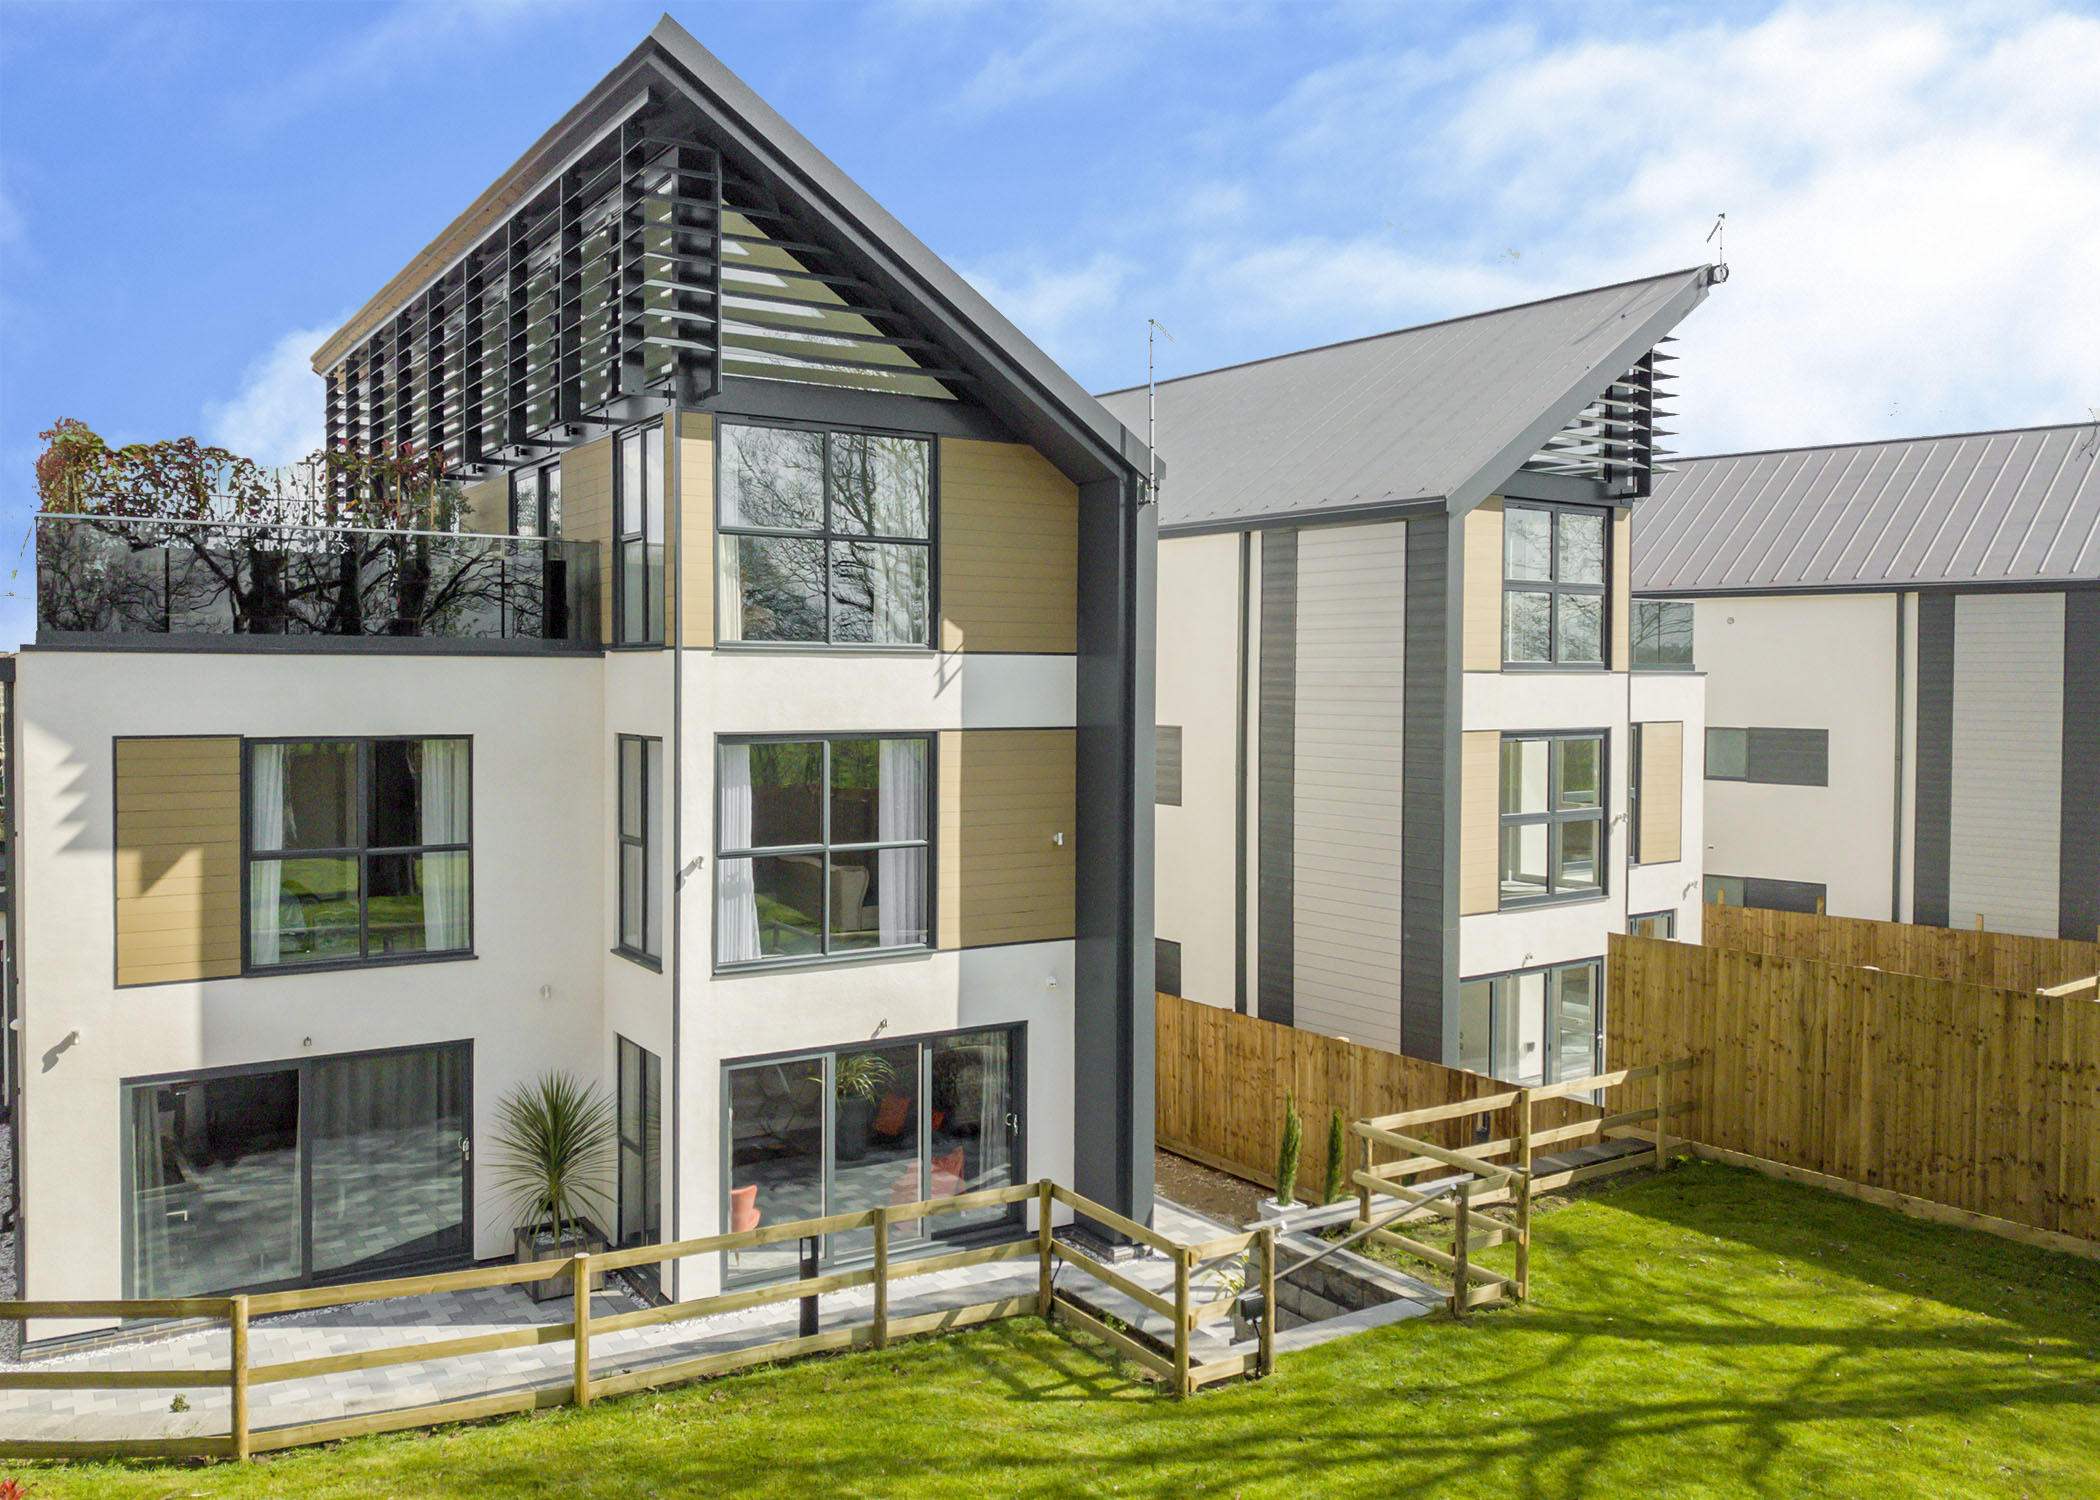 Vicaima bring an added dimension to William May development